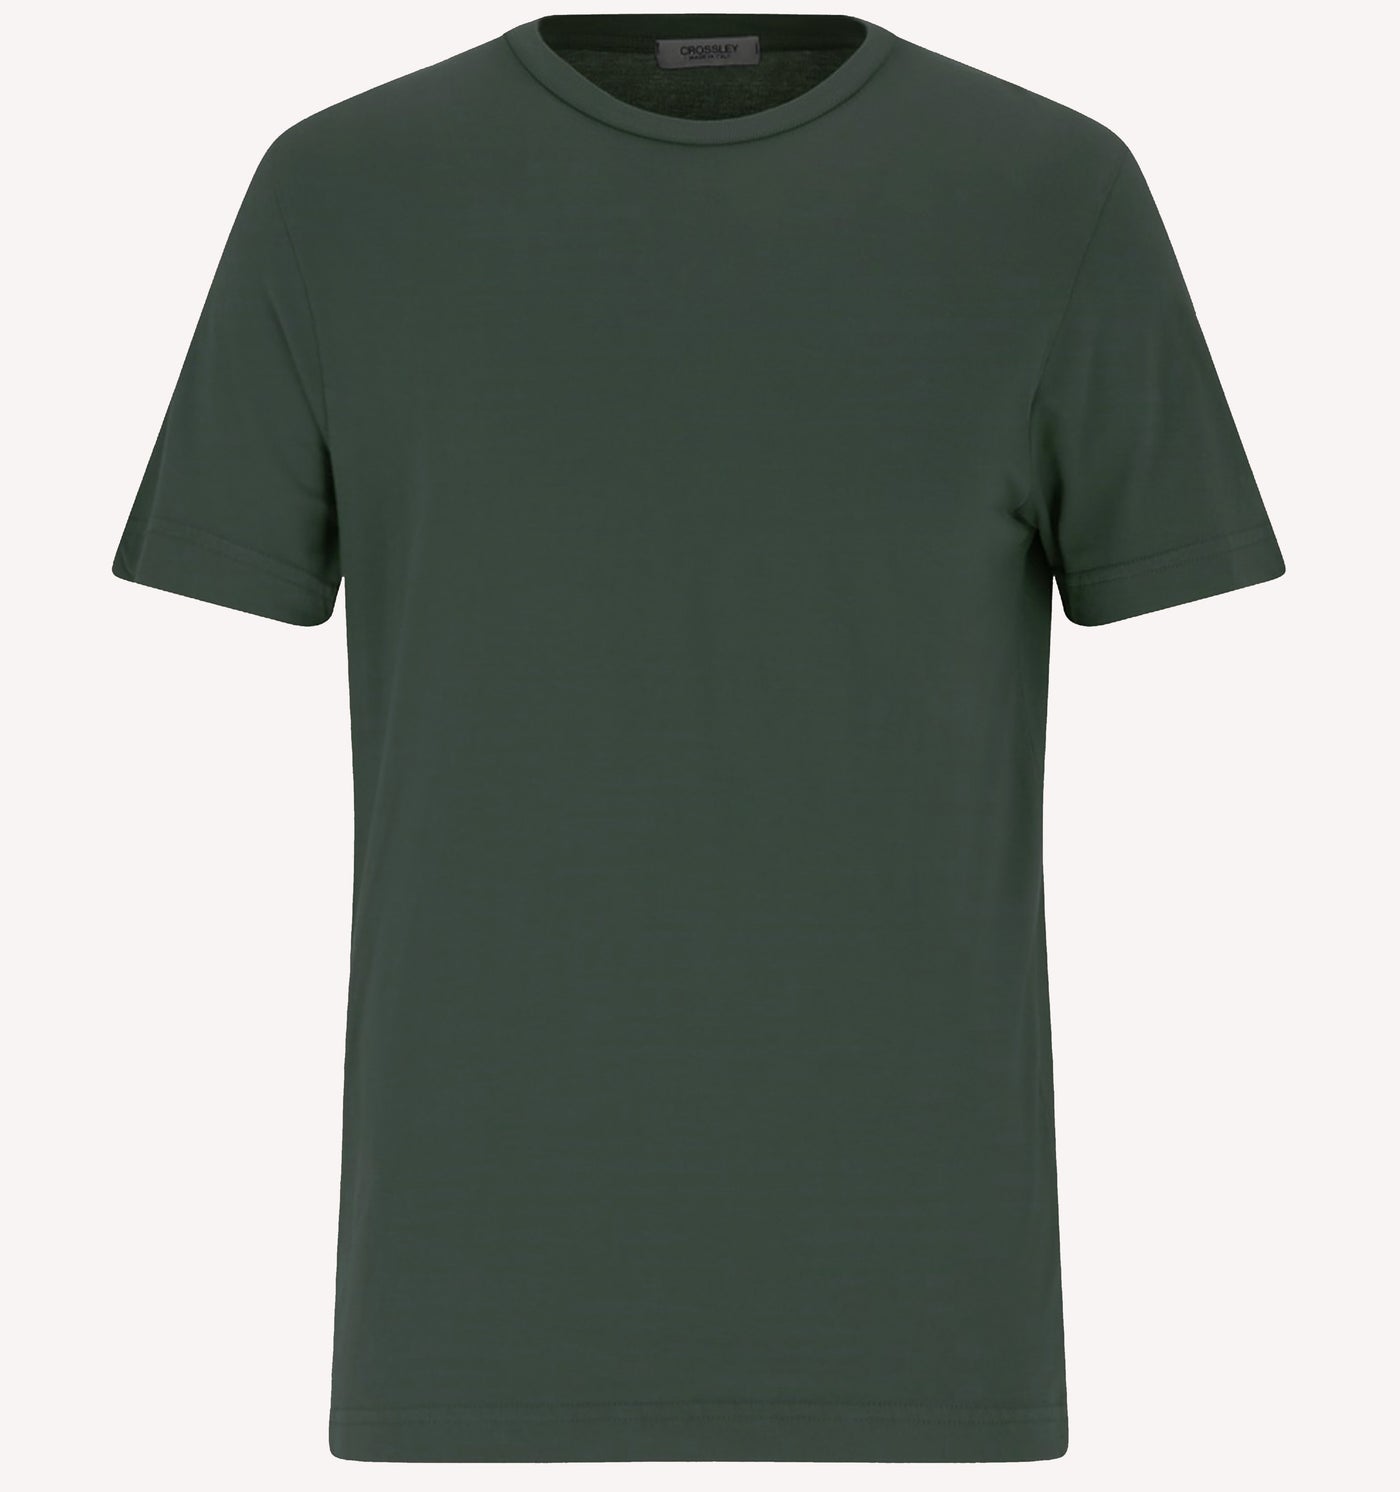 Crossley T-Shirt in Green Gables